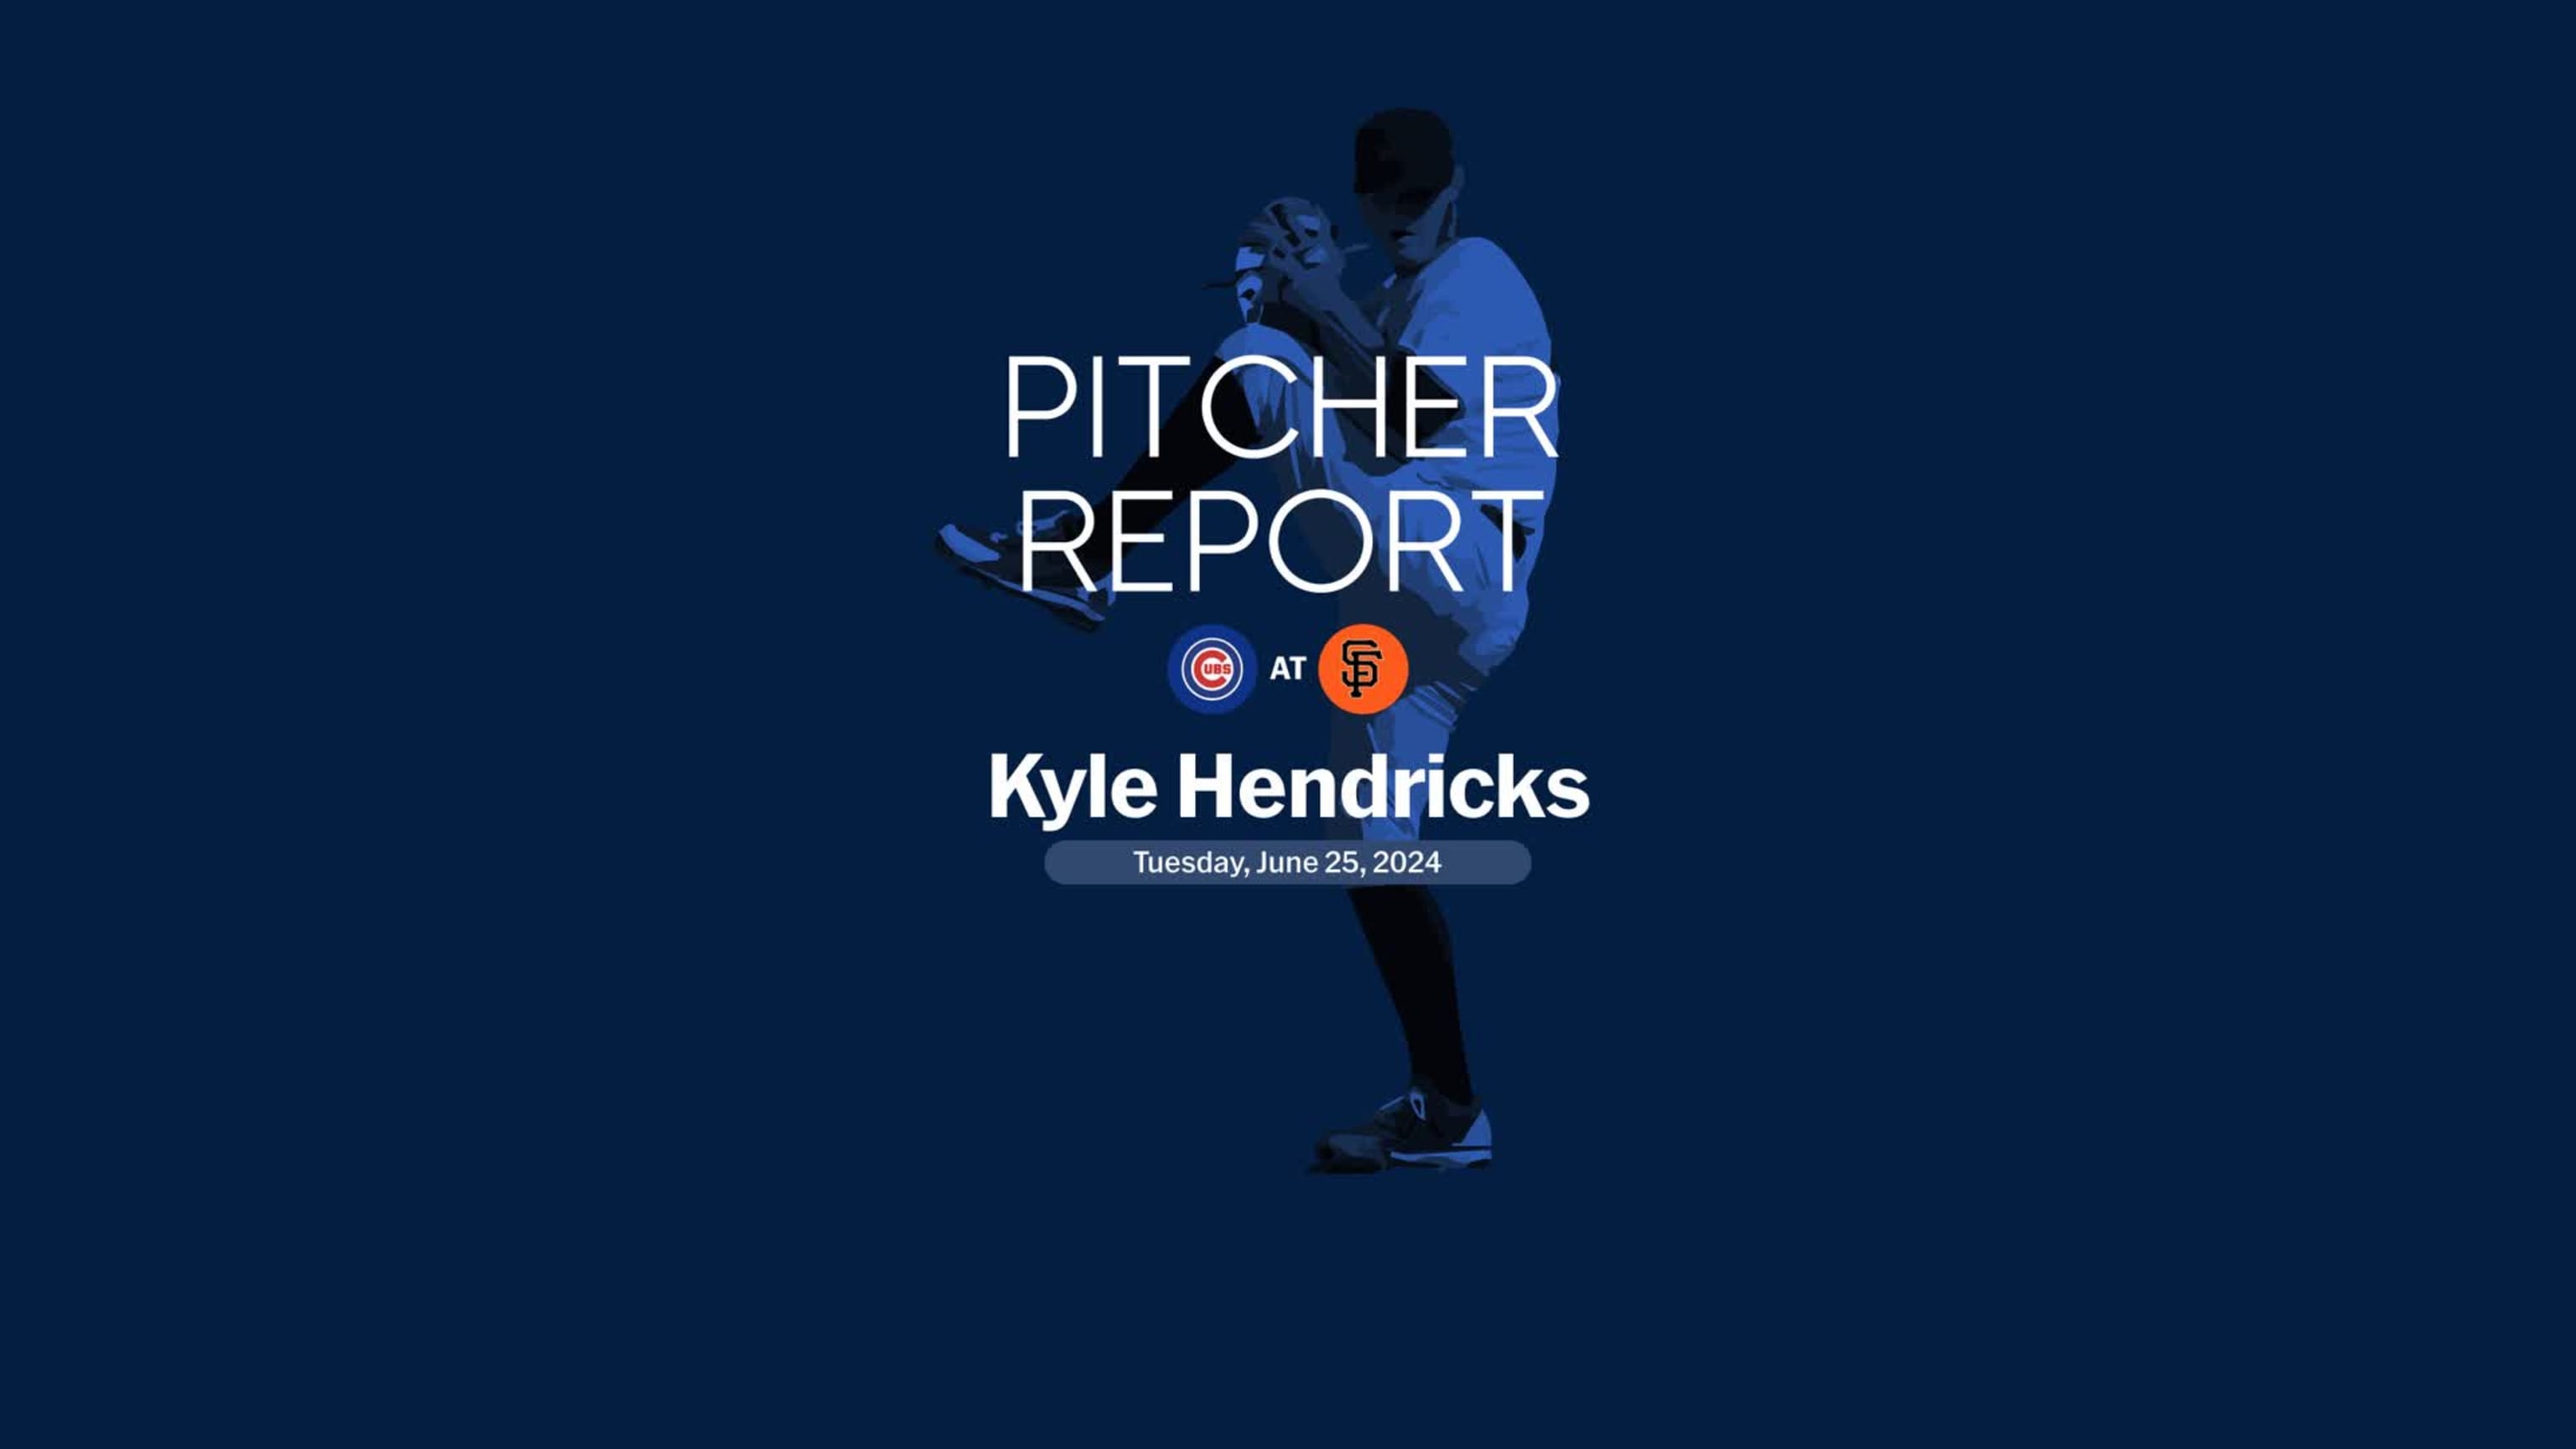 Kyle Hendricks' outing against the Giants